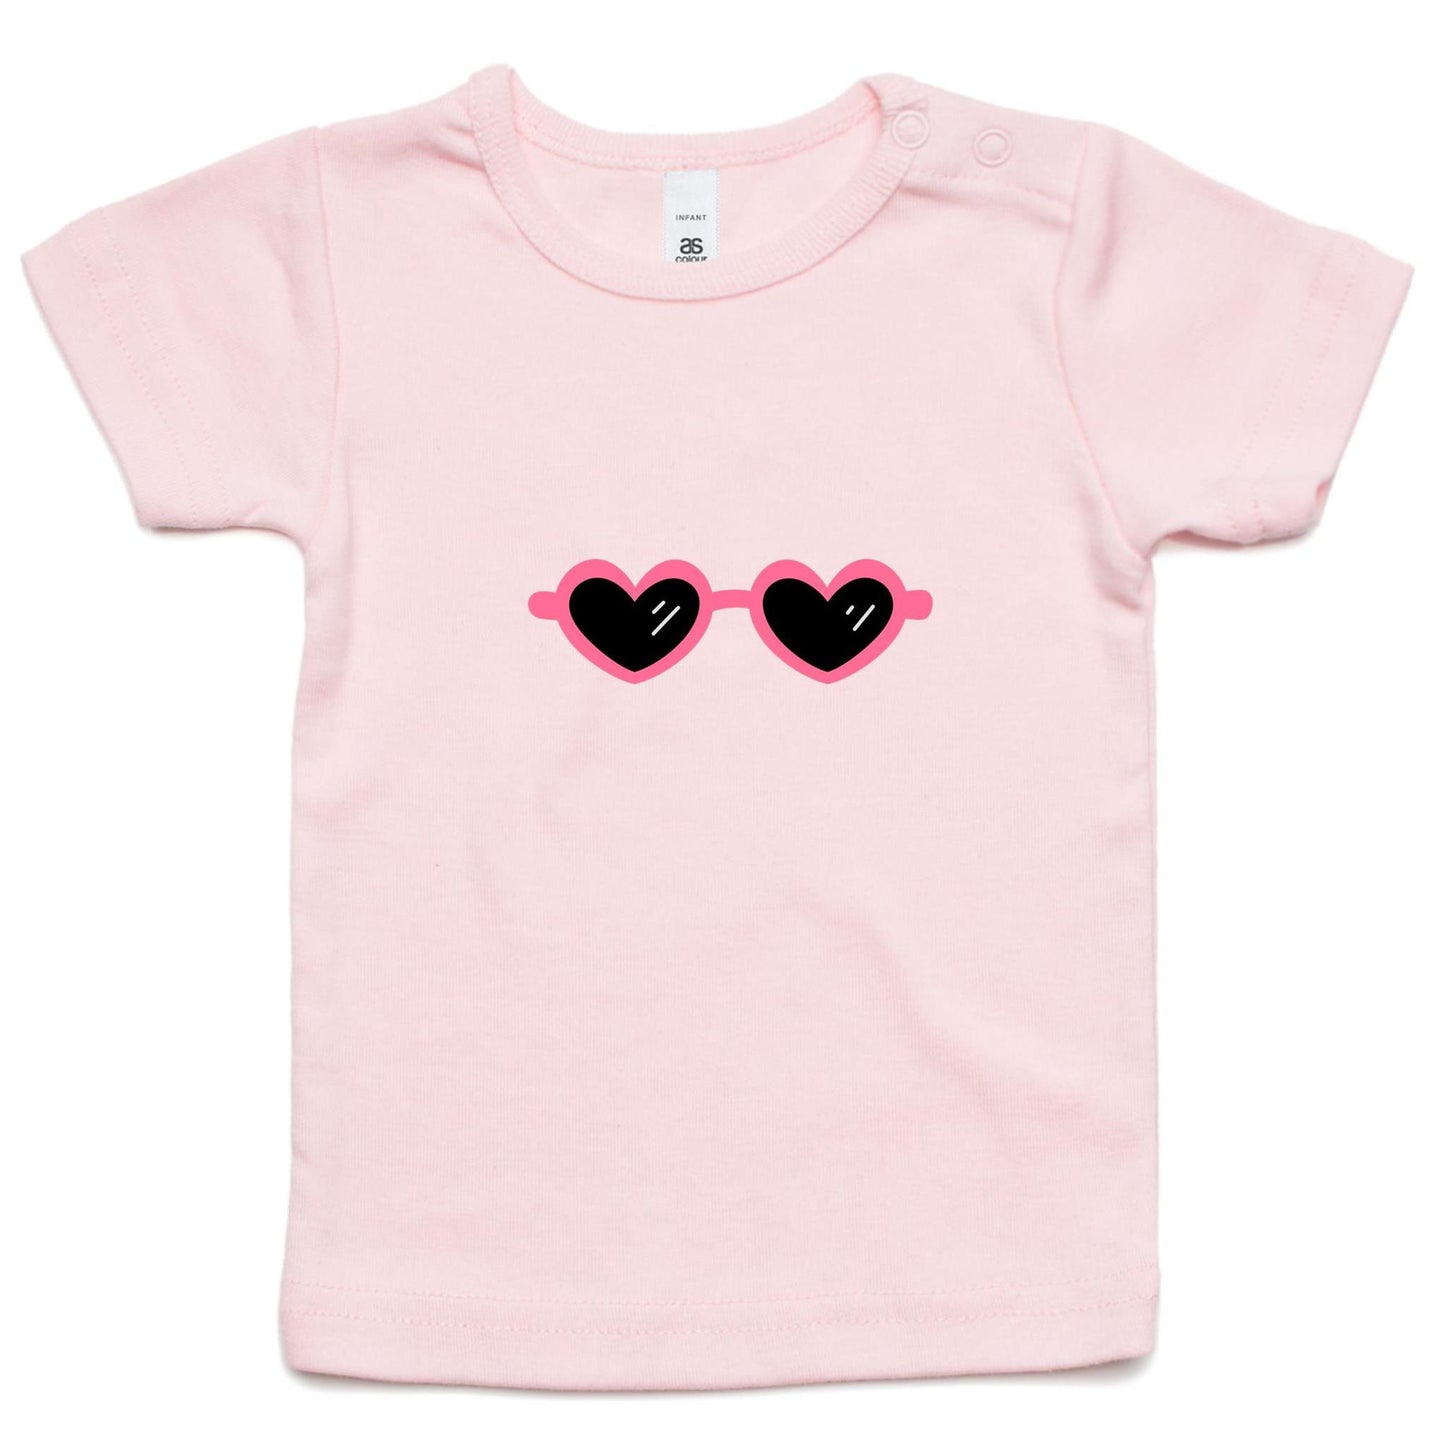 pink sunglasses - Infant Wee Tee